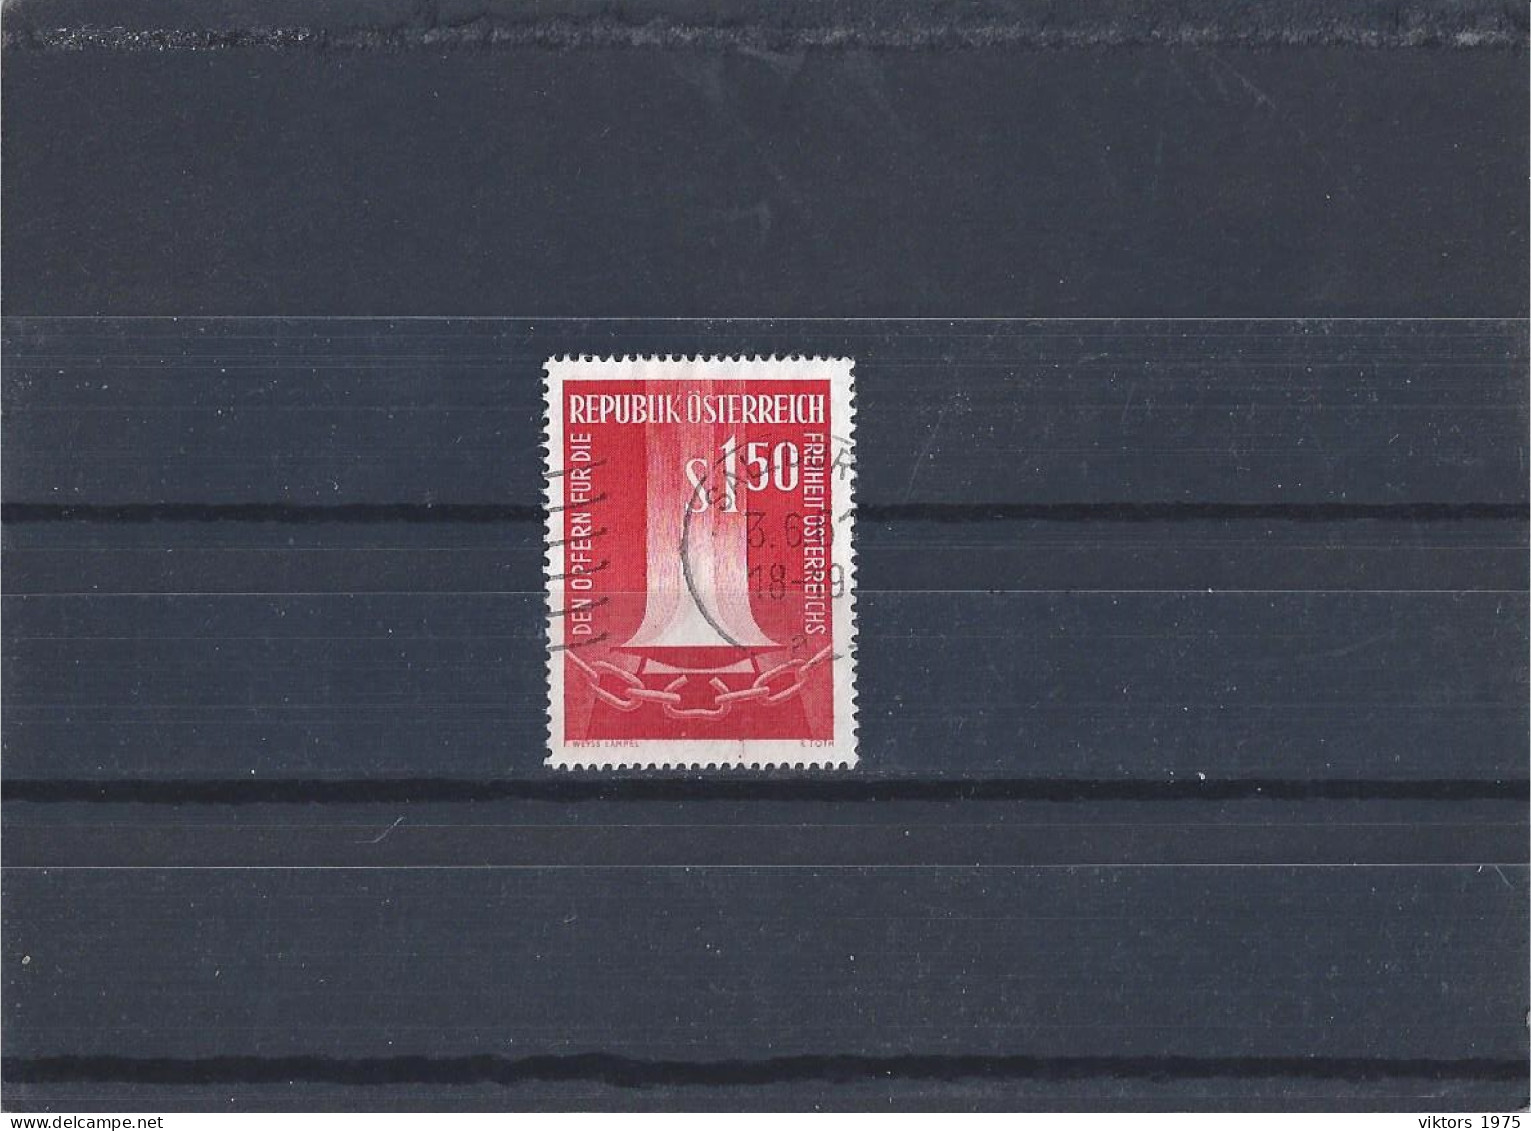 Used Stamp Nr.1084 In MICHEL Catalog - Used Stamps